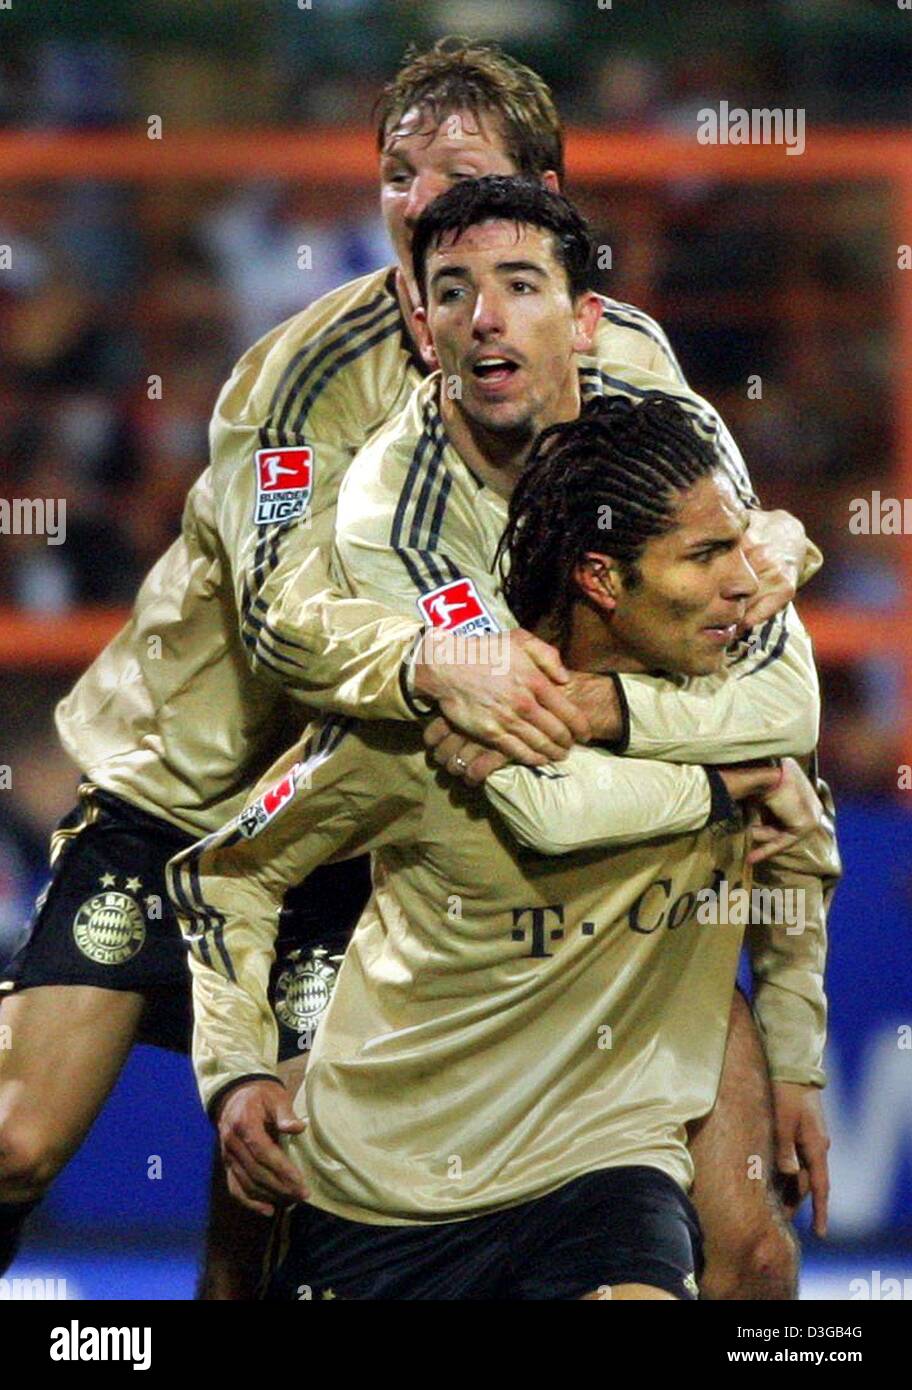 (dpa) - Bayern's goalgetter Jose Paolo Guerrero (front) celebrates with his teammates Roy Makaay (C) and Bastian Schweinsteiger (rear) during the Bundesliga game of Bayern Munich against VfL Bochum in Bochum, 14 November 2004. Bayern won 3-1. Stock Photo